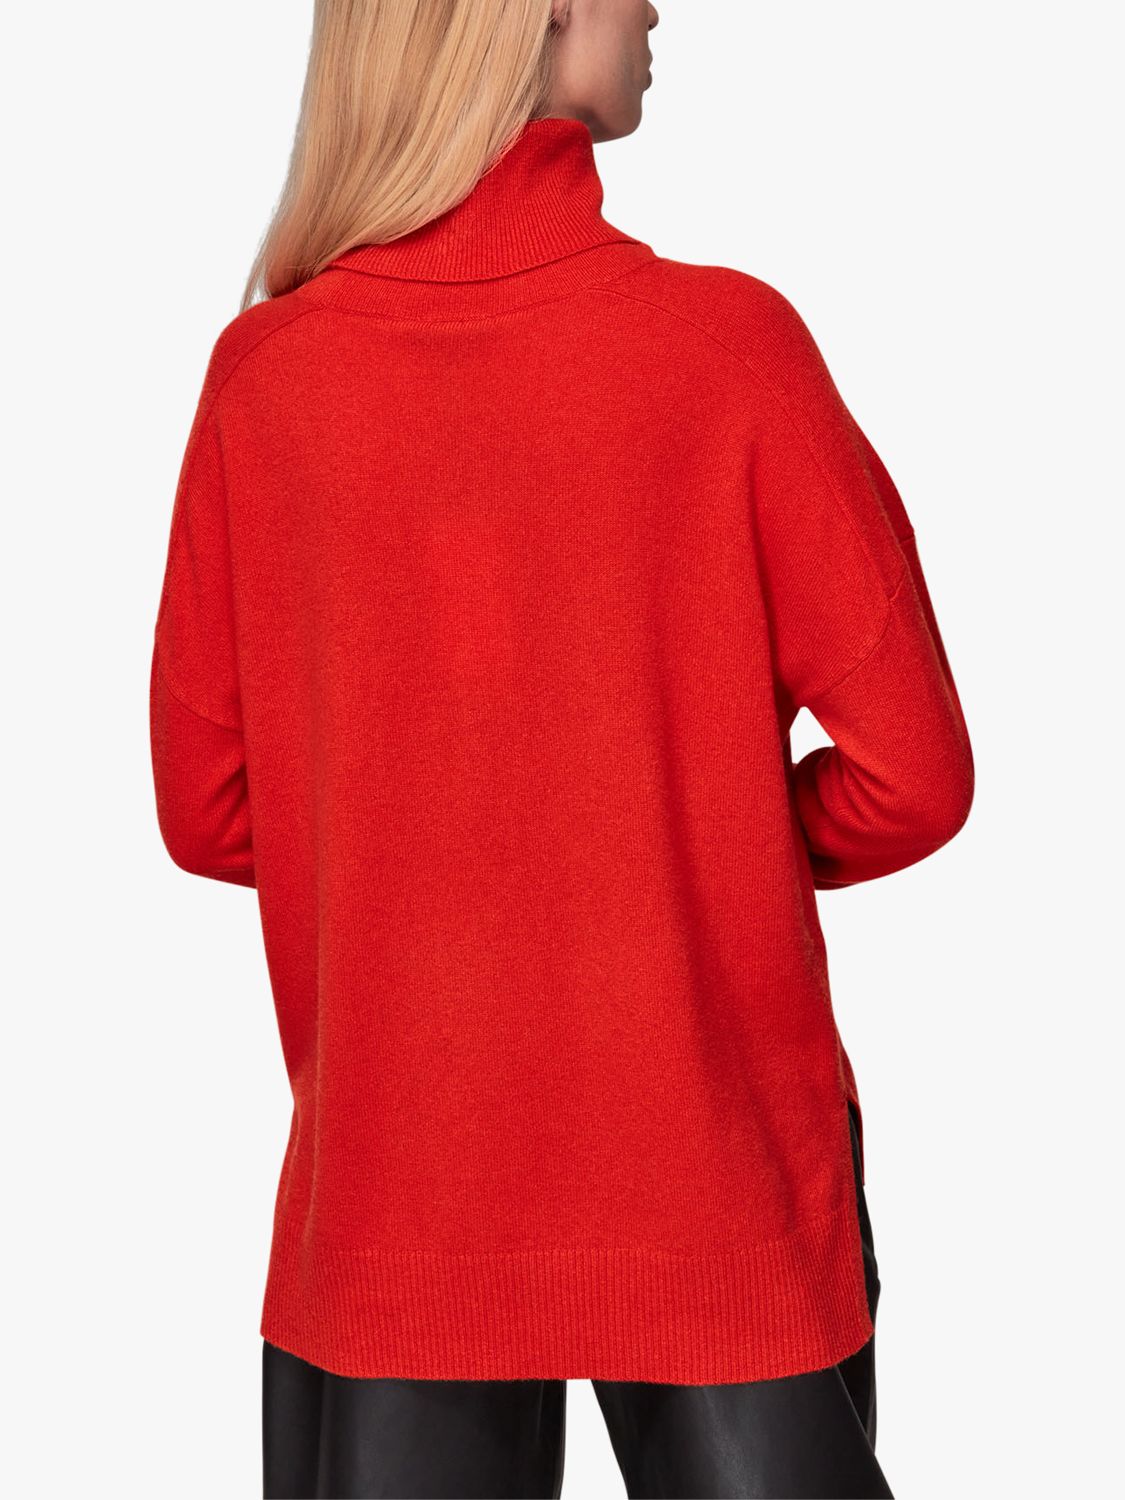 Whistles Cashmere Roll Jumper, Red at John Lewis & Partners